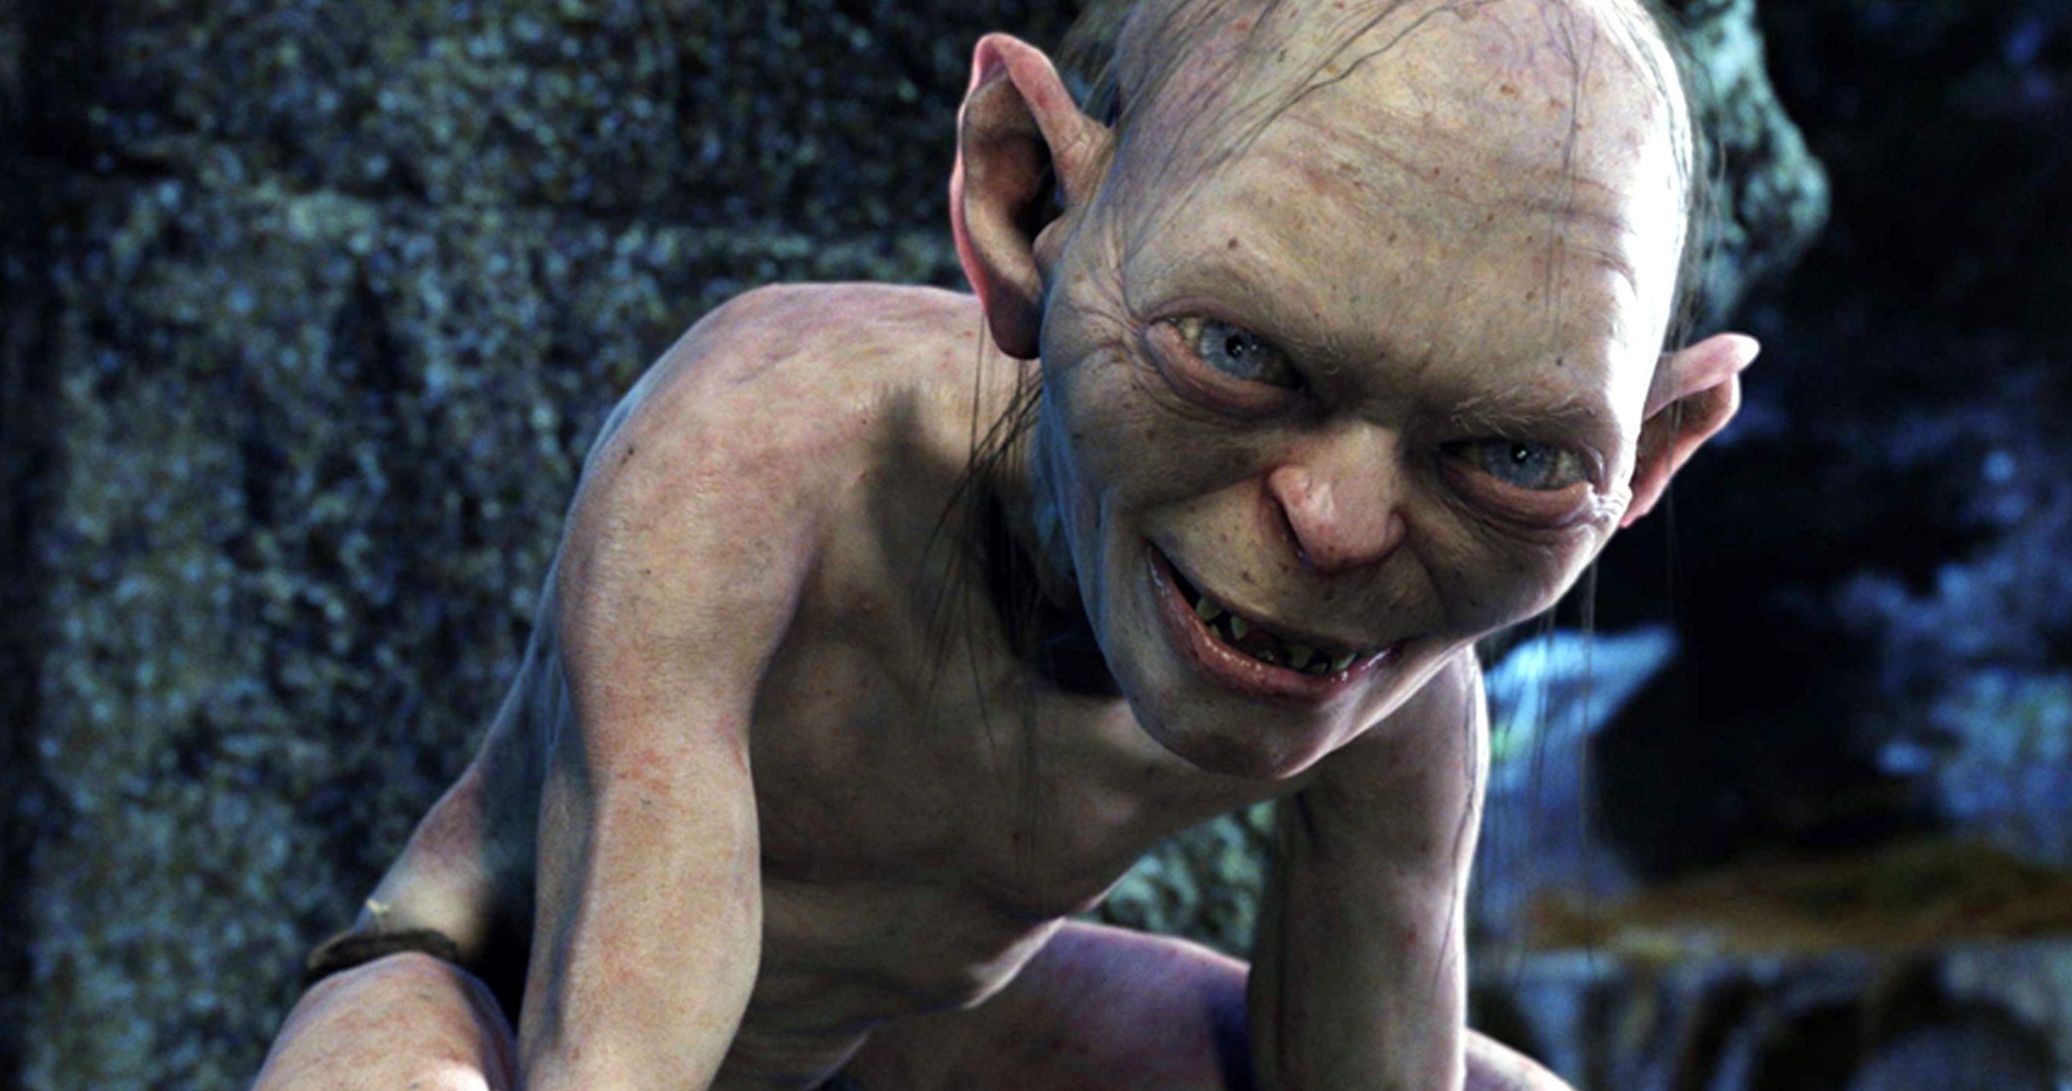 Preparing for Gollum in Lord of the Rings, Andy Serkis Would Walk on All Fours for Hours